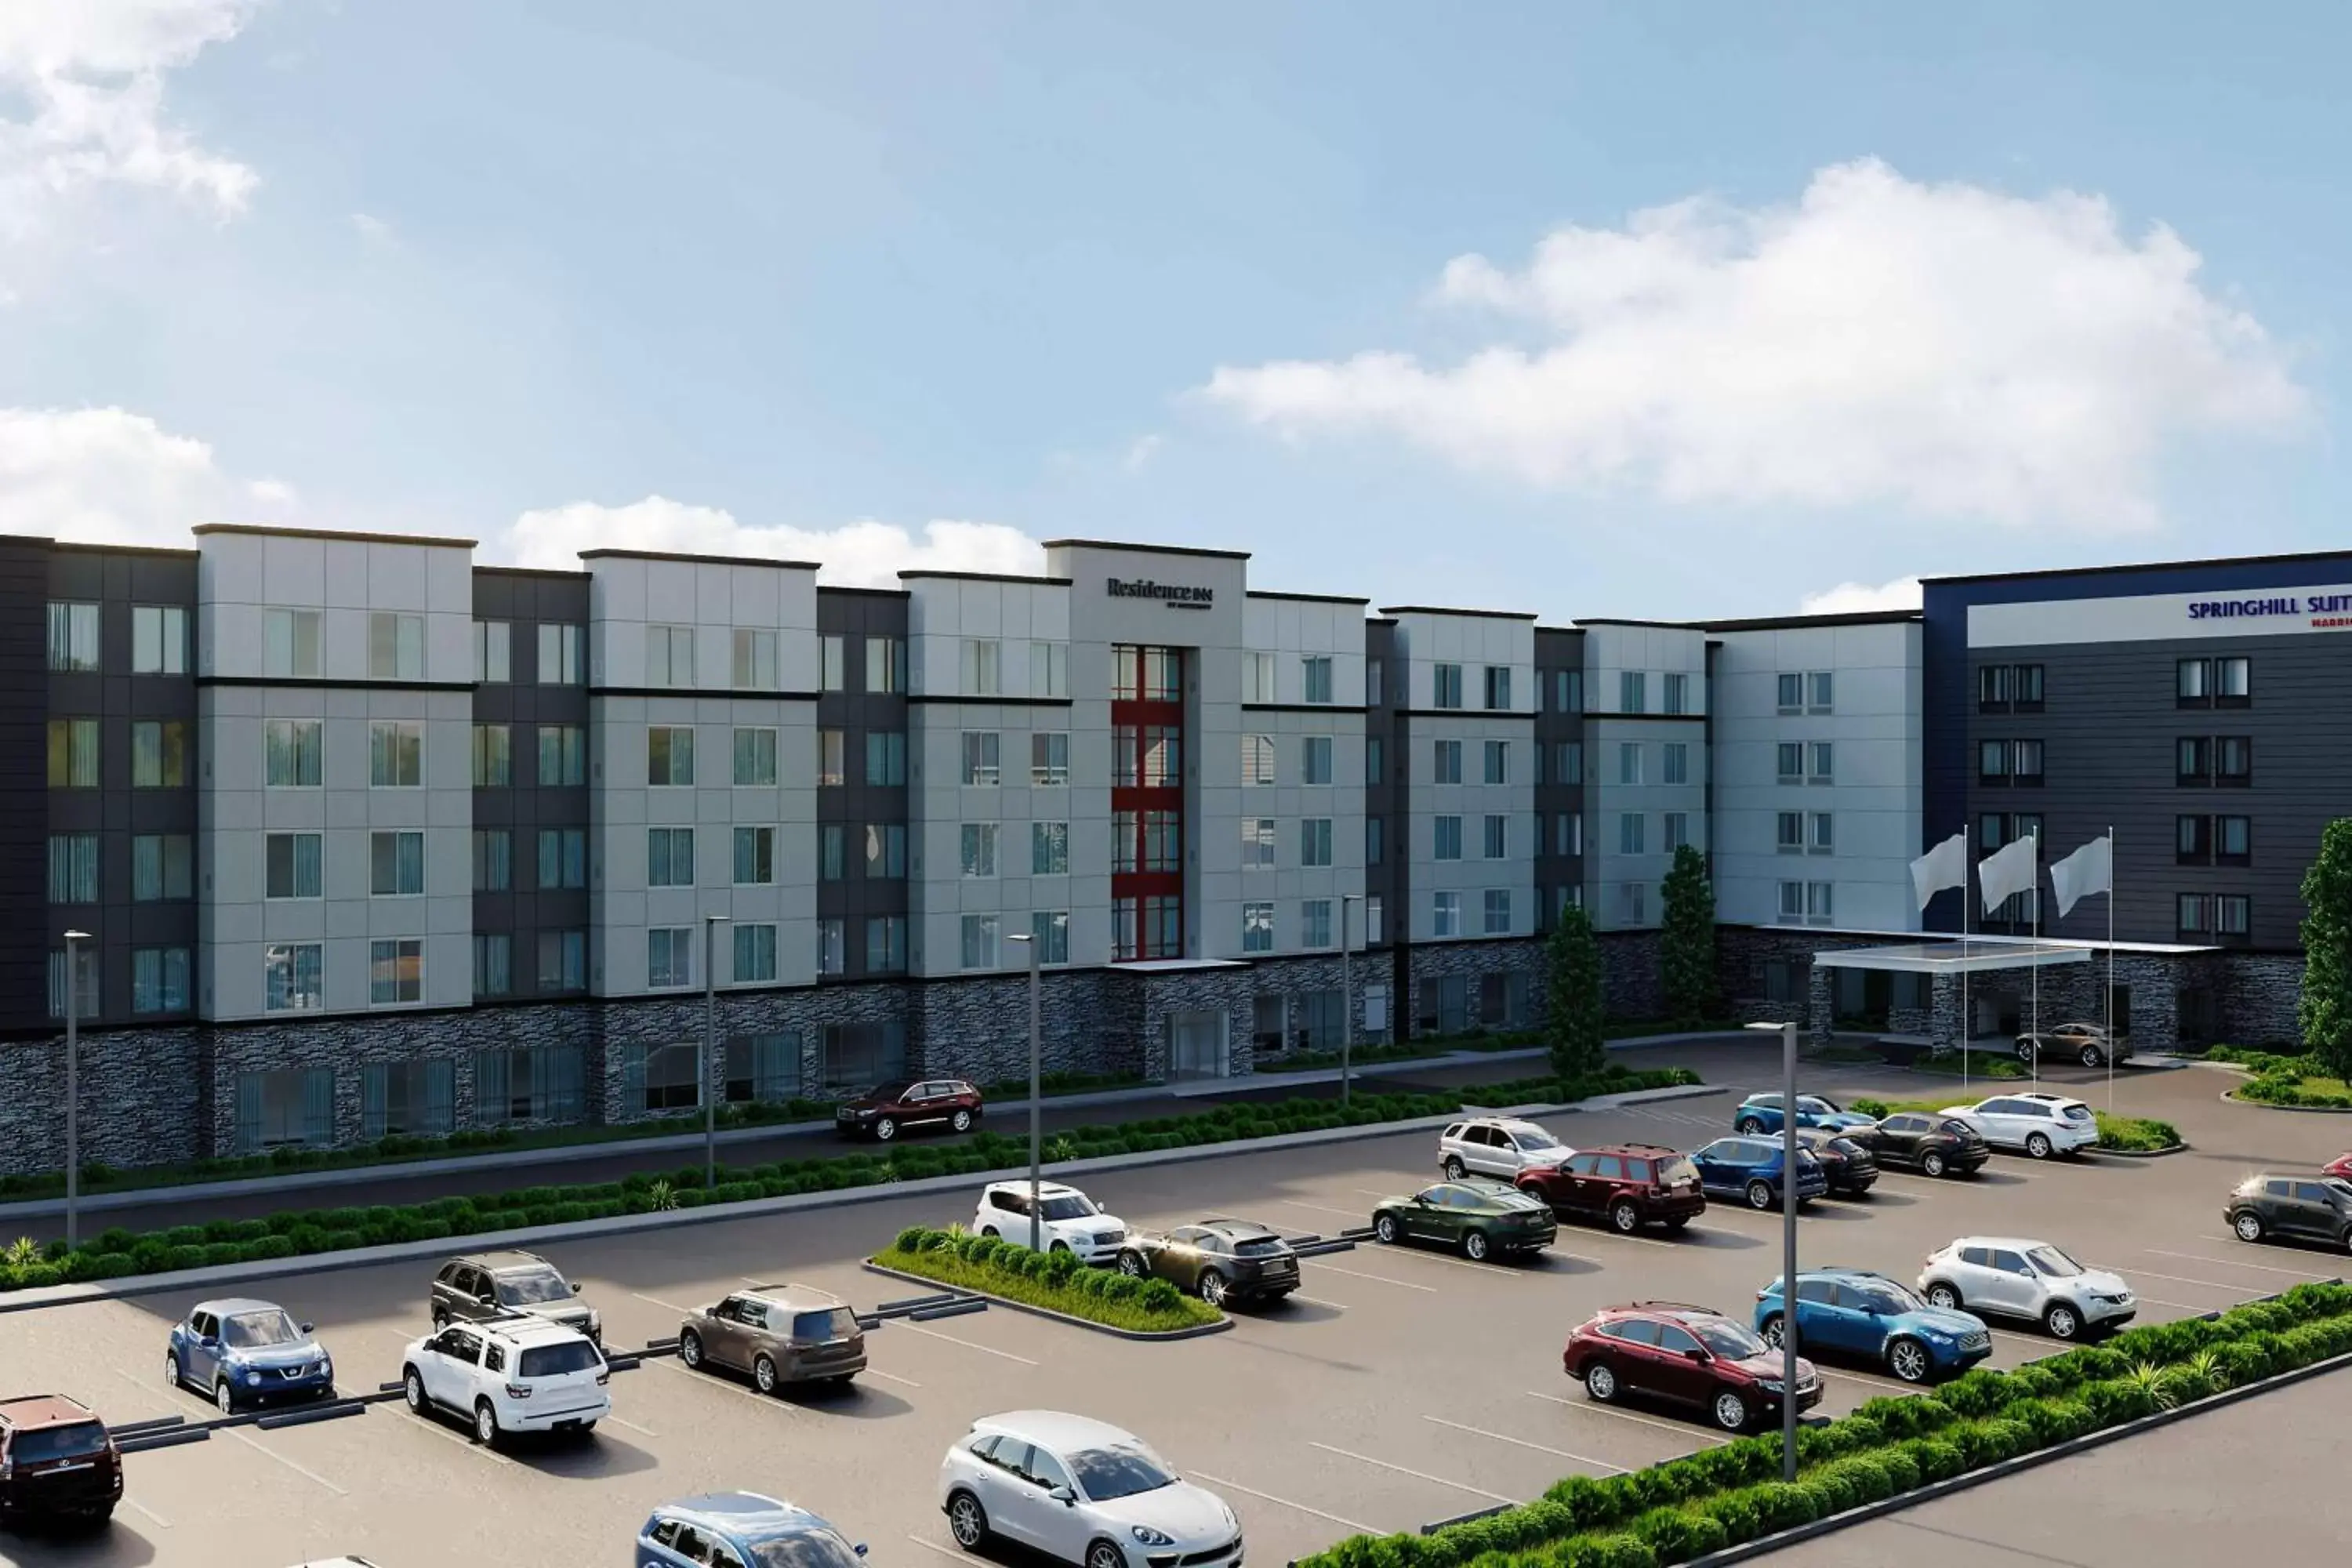 Property Building in Residence Inn By Marriott Indianapolis Keystone